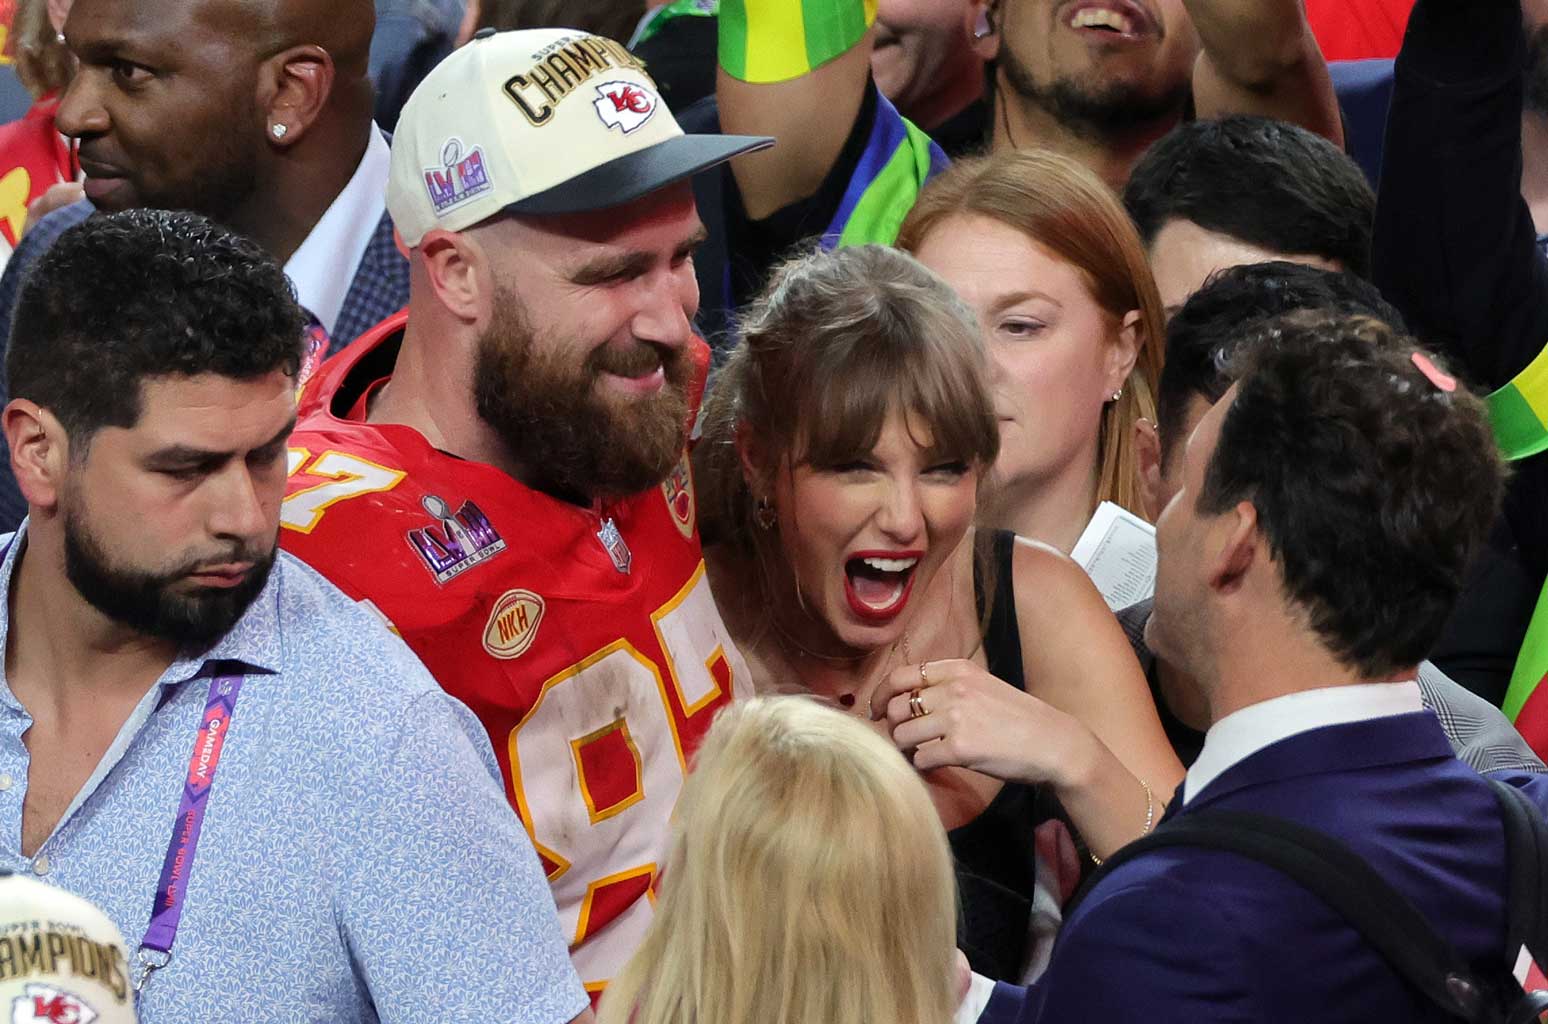 taylor swift accidentally partied with her parents after chiefs' super bowl win, and she liked it